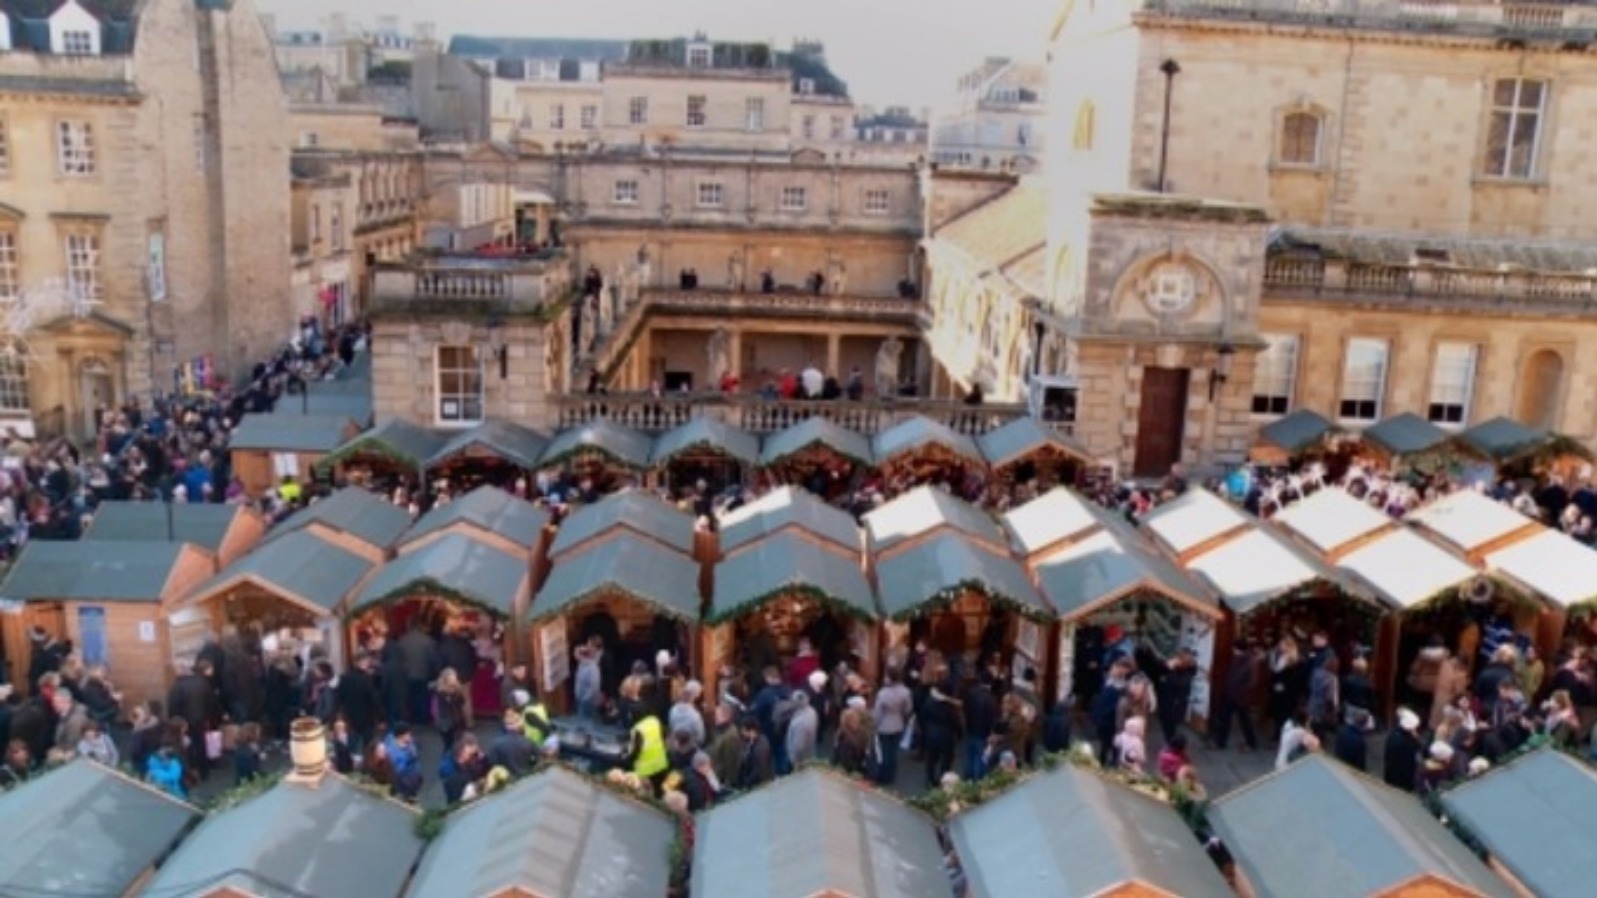 Bath Christmas Market 2021 to run for extra week for first time in its